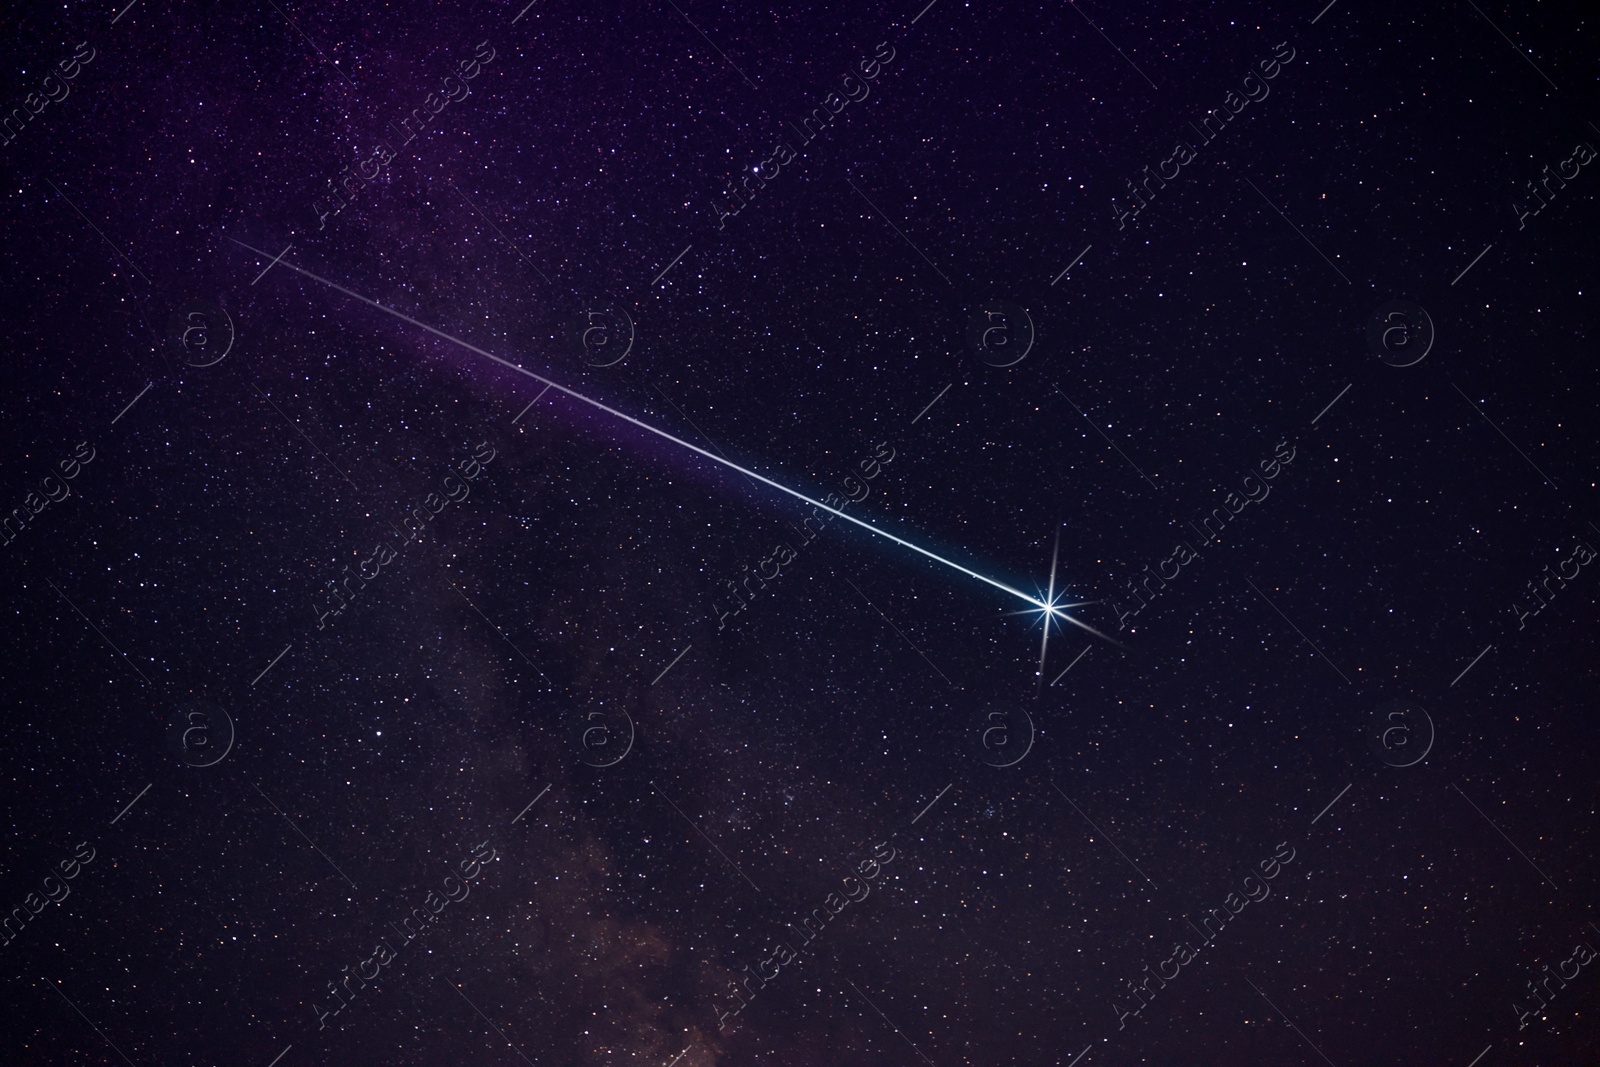 Image of Picturesque view of shooting star in night sky